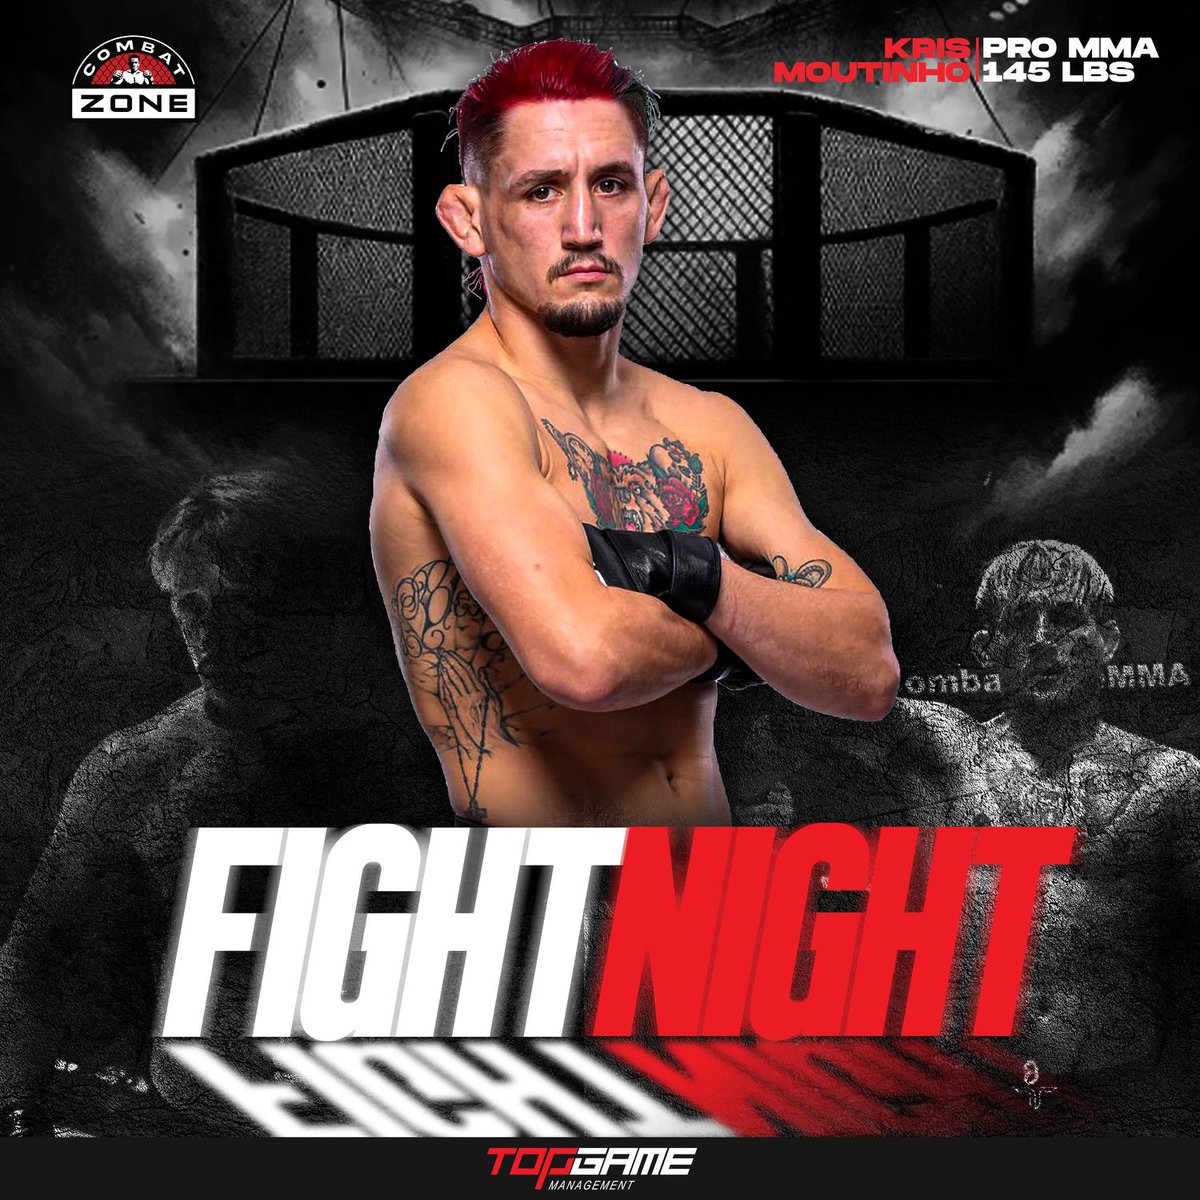 🚨 TRIPE FIGHT DAY 🚨 Combat Zone 84 goes down tonight in Manchester, NH! We’ve got three beasts on the card in Kris Moutinho, Tim Flores & Tom Pagliarulo! Event kicks off 6 PM ET on the Combat Zone website. BE THERE! LET’S GO BOYS! #NewEnglandMMA #CZ84 Art by @tjkilledit 🎨